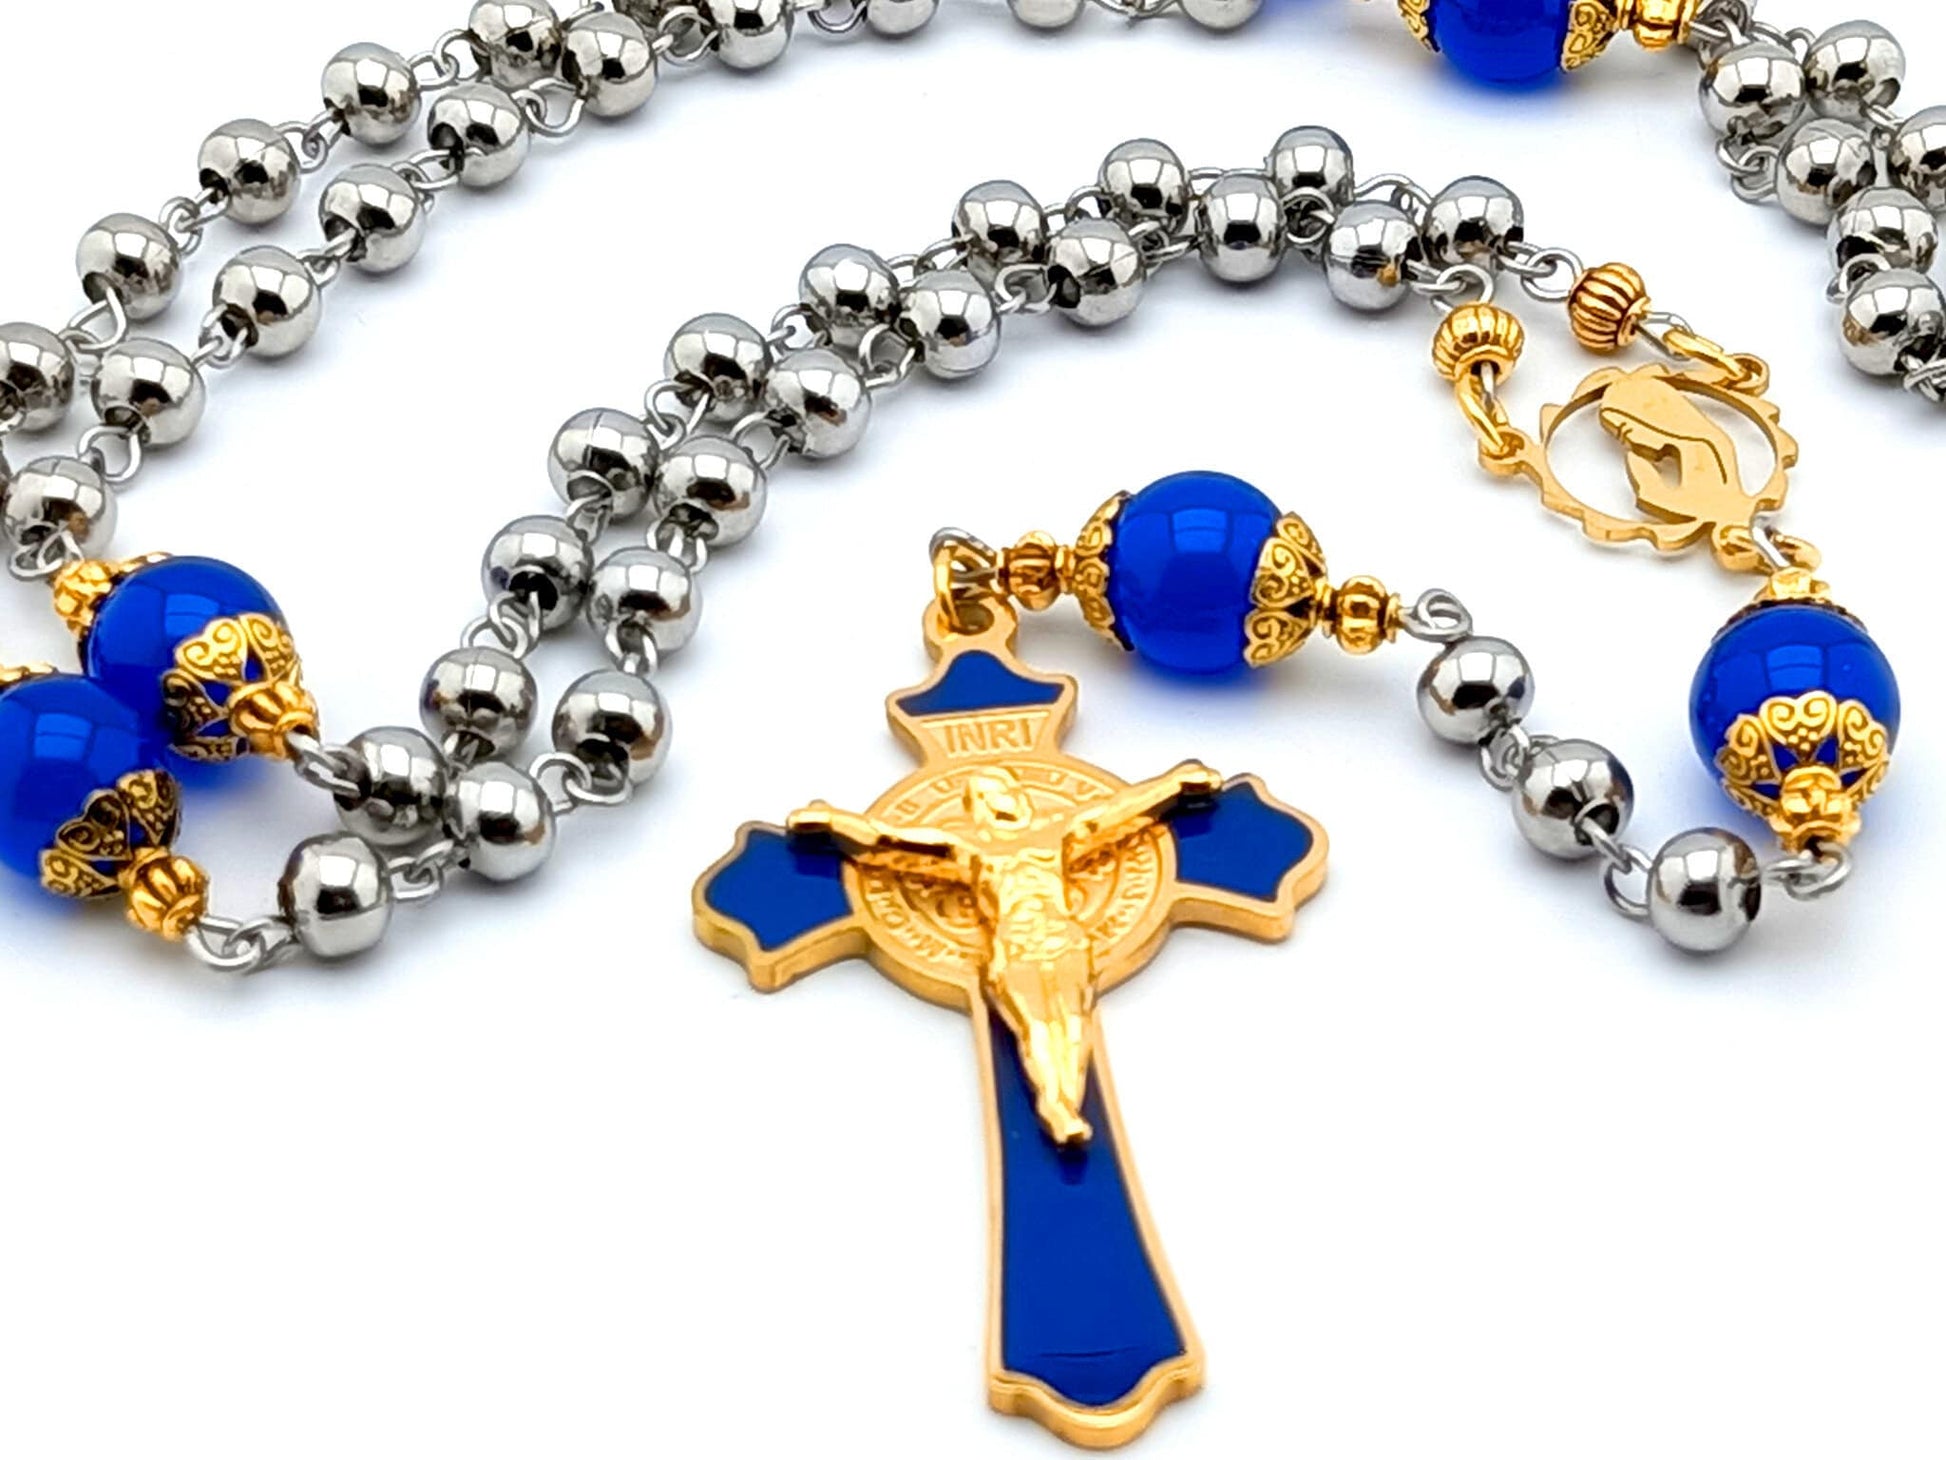 Saint Benedict unique rosary beads with stainless steel and sapphire gemstone beads, gold plated steel blue enamel crucifix and gold plated Virgin Mary centre medal.